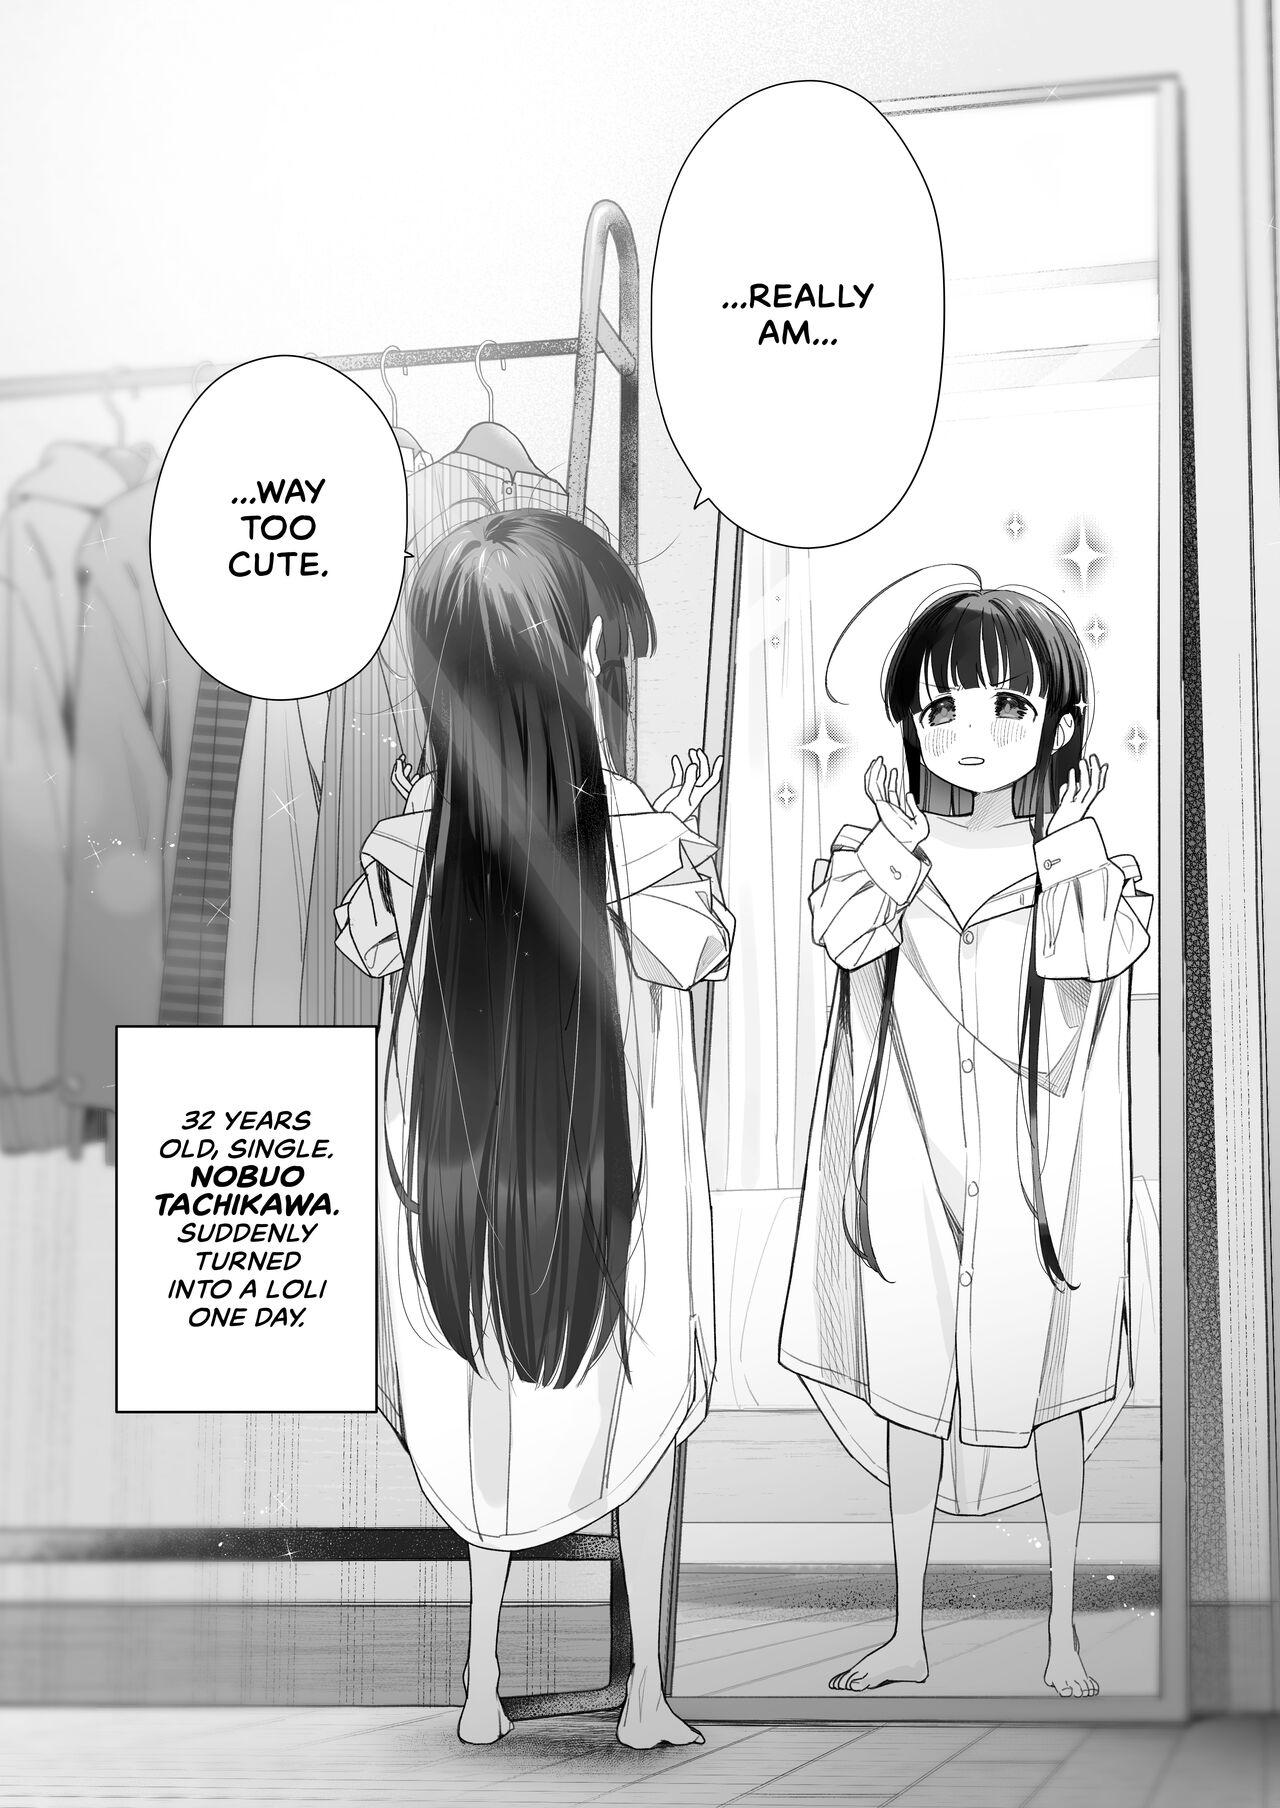 Lima [Asunaro Neat. (Ronna)] TS Loli Oji-san no Bouken Onanie Hen | The Adventures of an Old Man Who Was Gender-Swapped Into a Loli ~Masturbation Chapter~ [English] [CulturedCommissions] [Digital] - Original Black Gay - Page 3